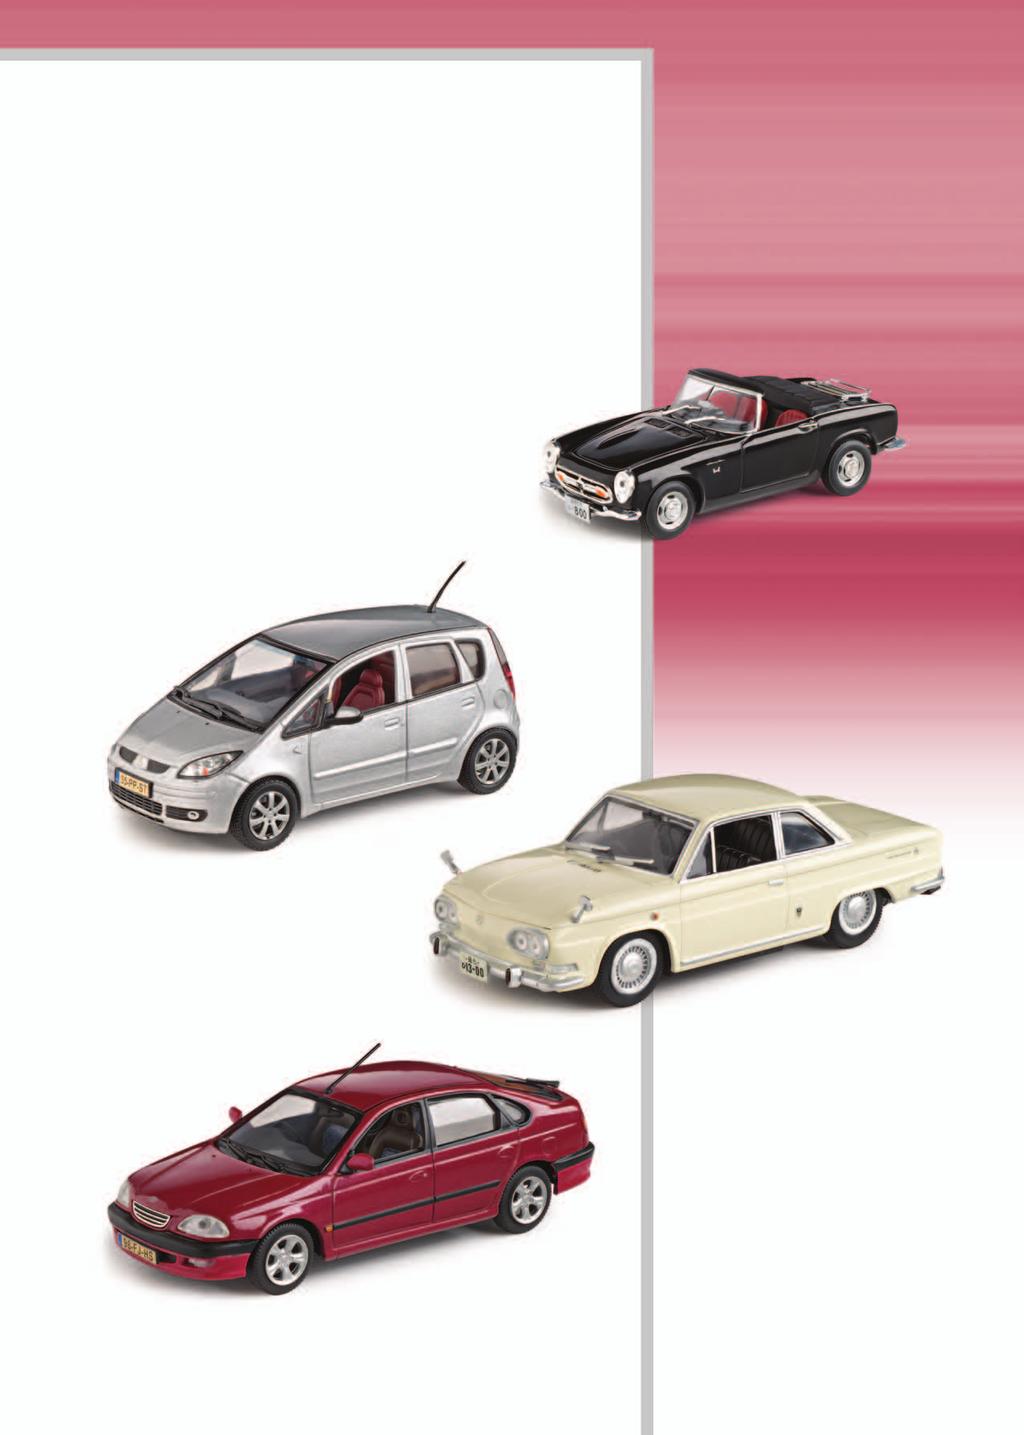 1:43 SCALE A completely new range of six models for you to collect starting with the Hino Contessa, Mitsubishi Colt and Lancer, Toyota Avensis and Ipsum and Honda S800.